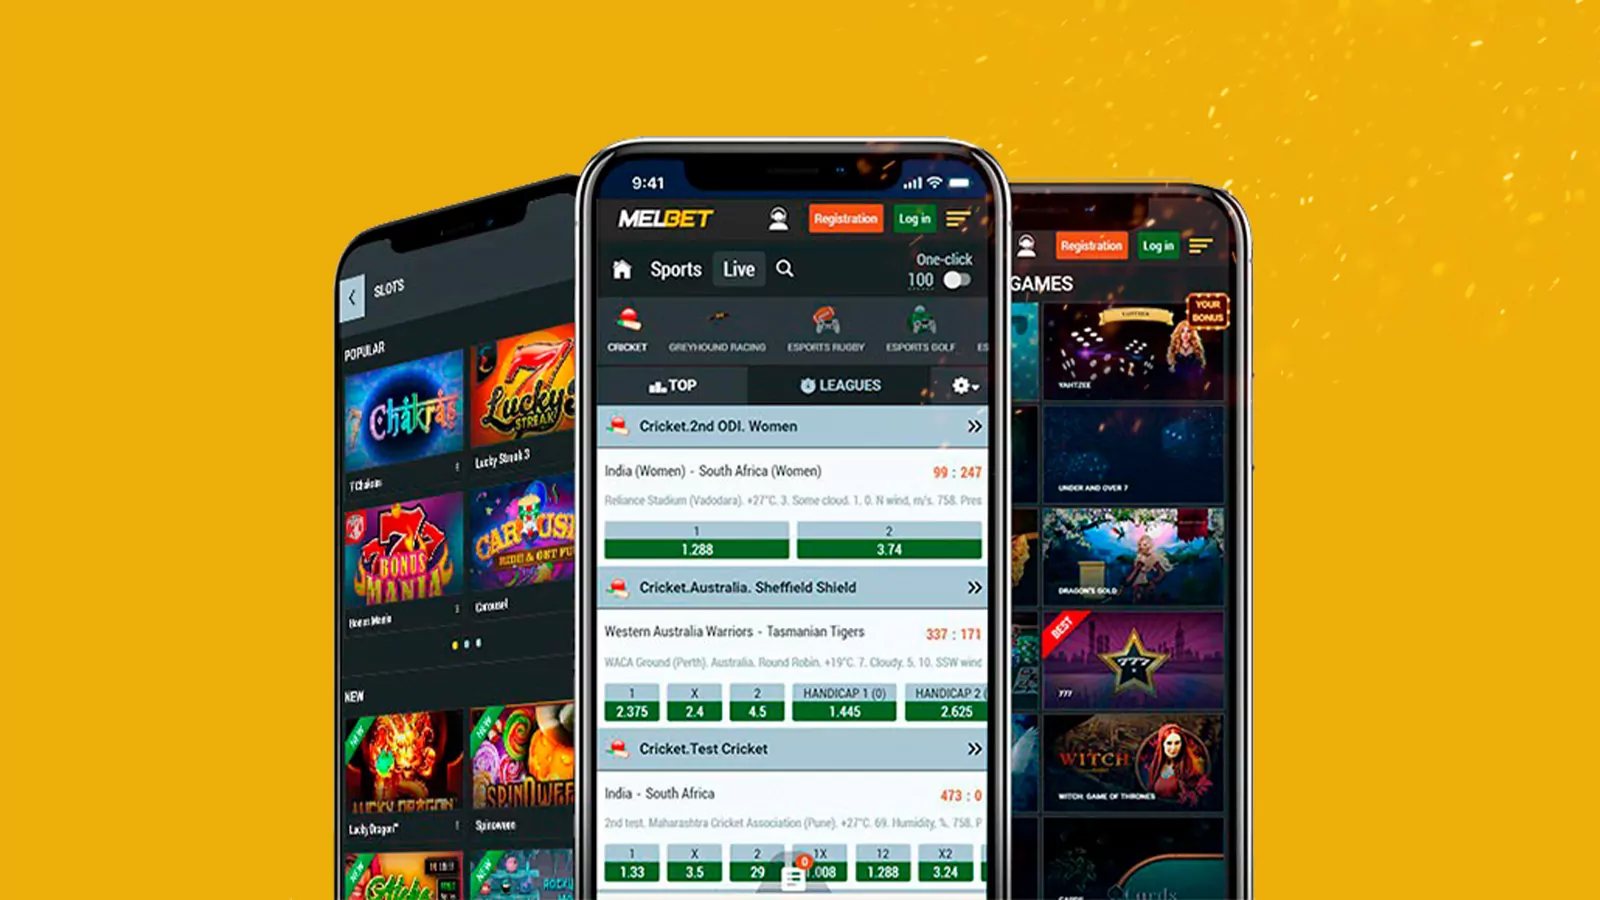 Melbet is very popular among Indian players so you've probably heard about its wonderful app for cricket betting.